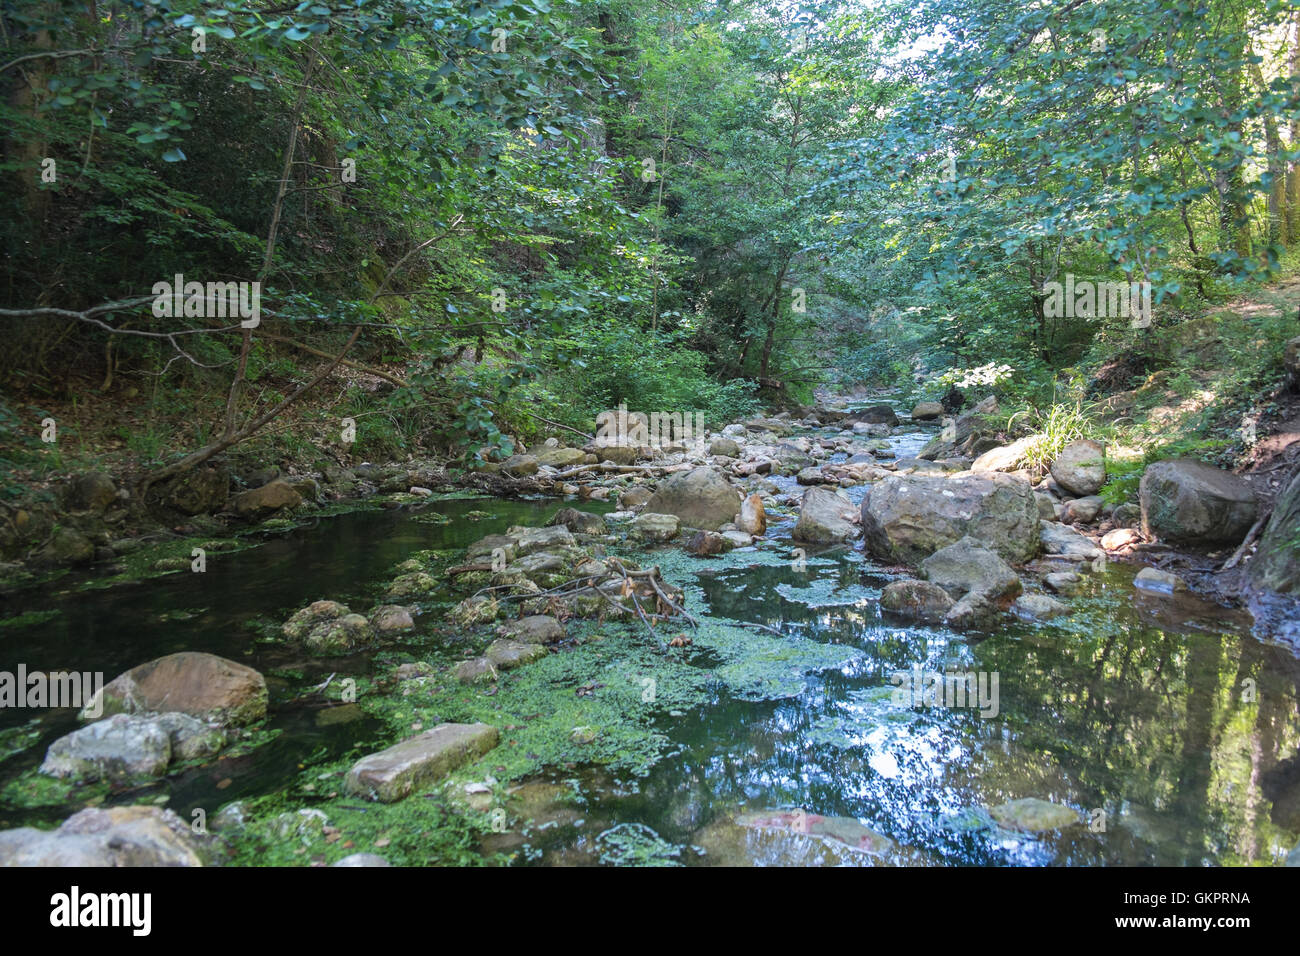 Udelade afskaffet tidligere Page 5 - Bugarach High Resolution Stock Photography and Images - Alamy